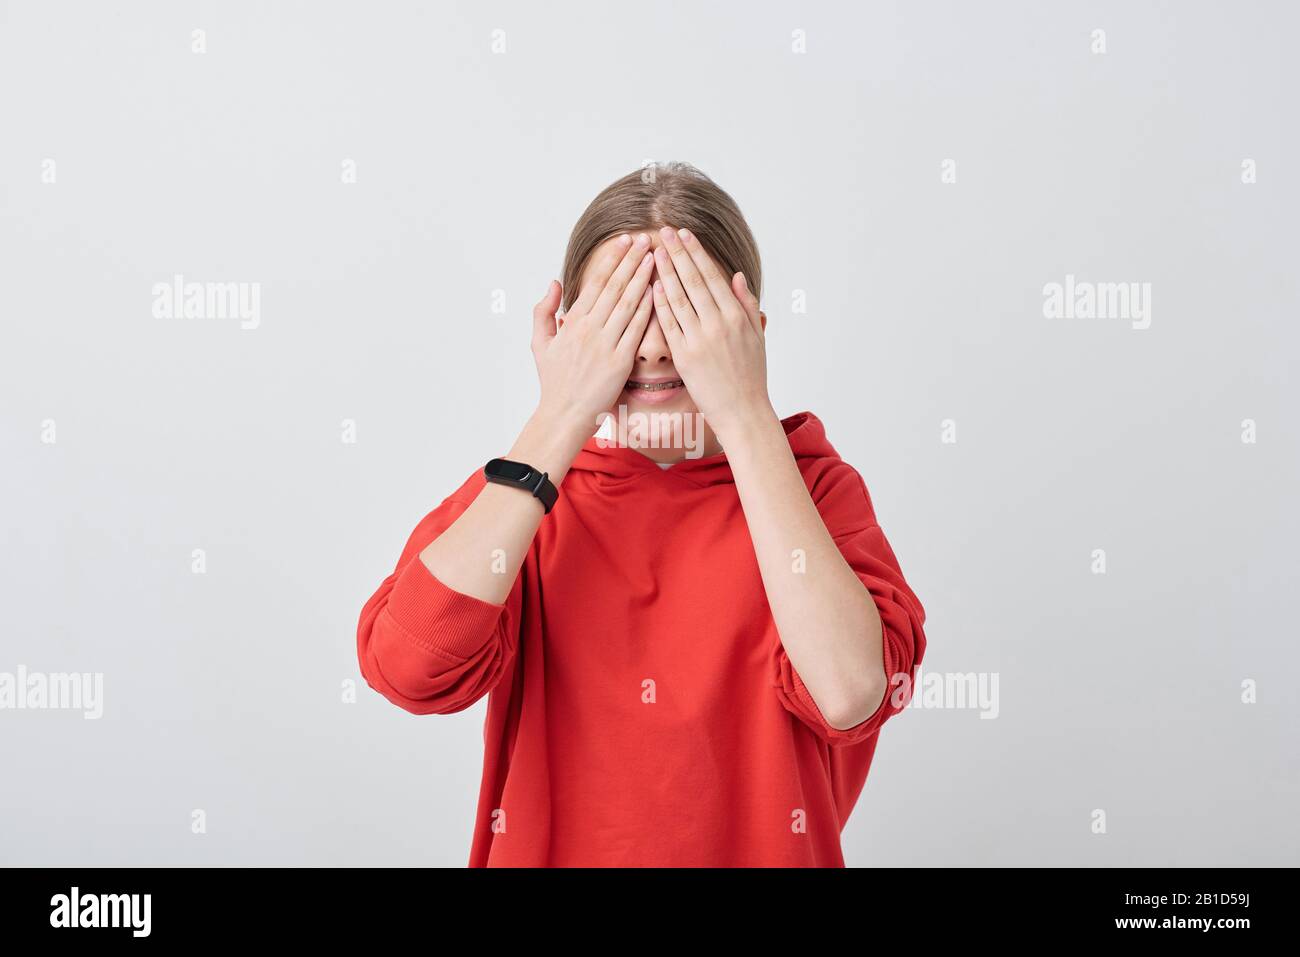 Smiling teenage girl in red sweatshirt covering eyes with hands while playing hide-and-seek Stock Photo